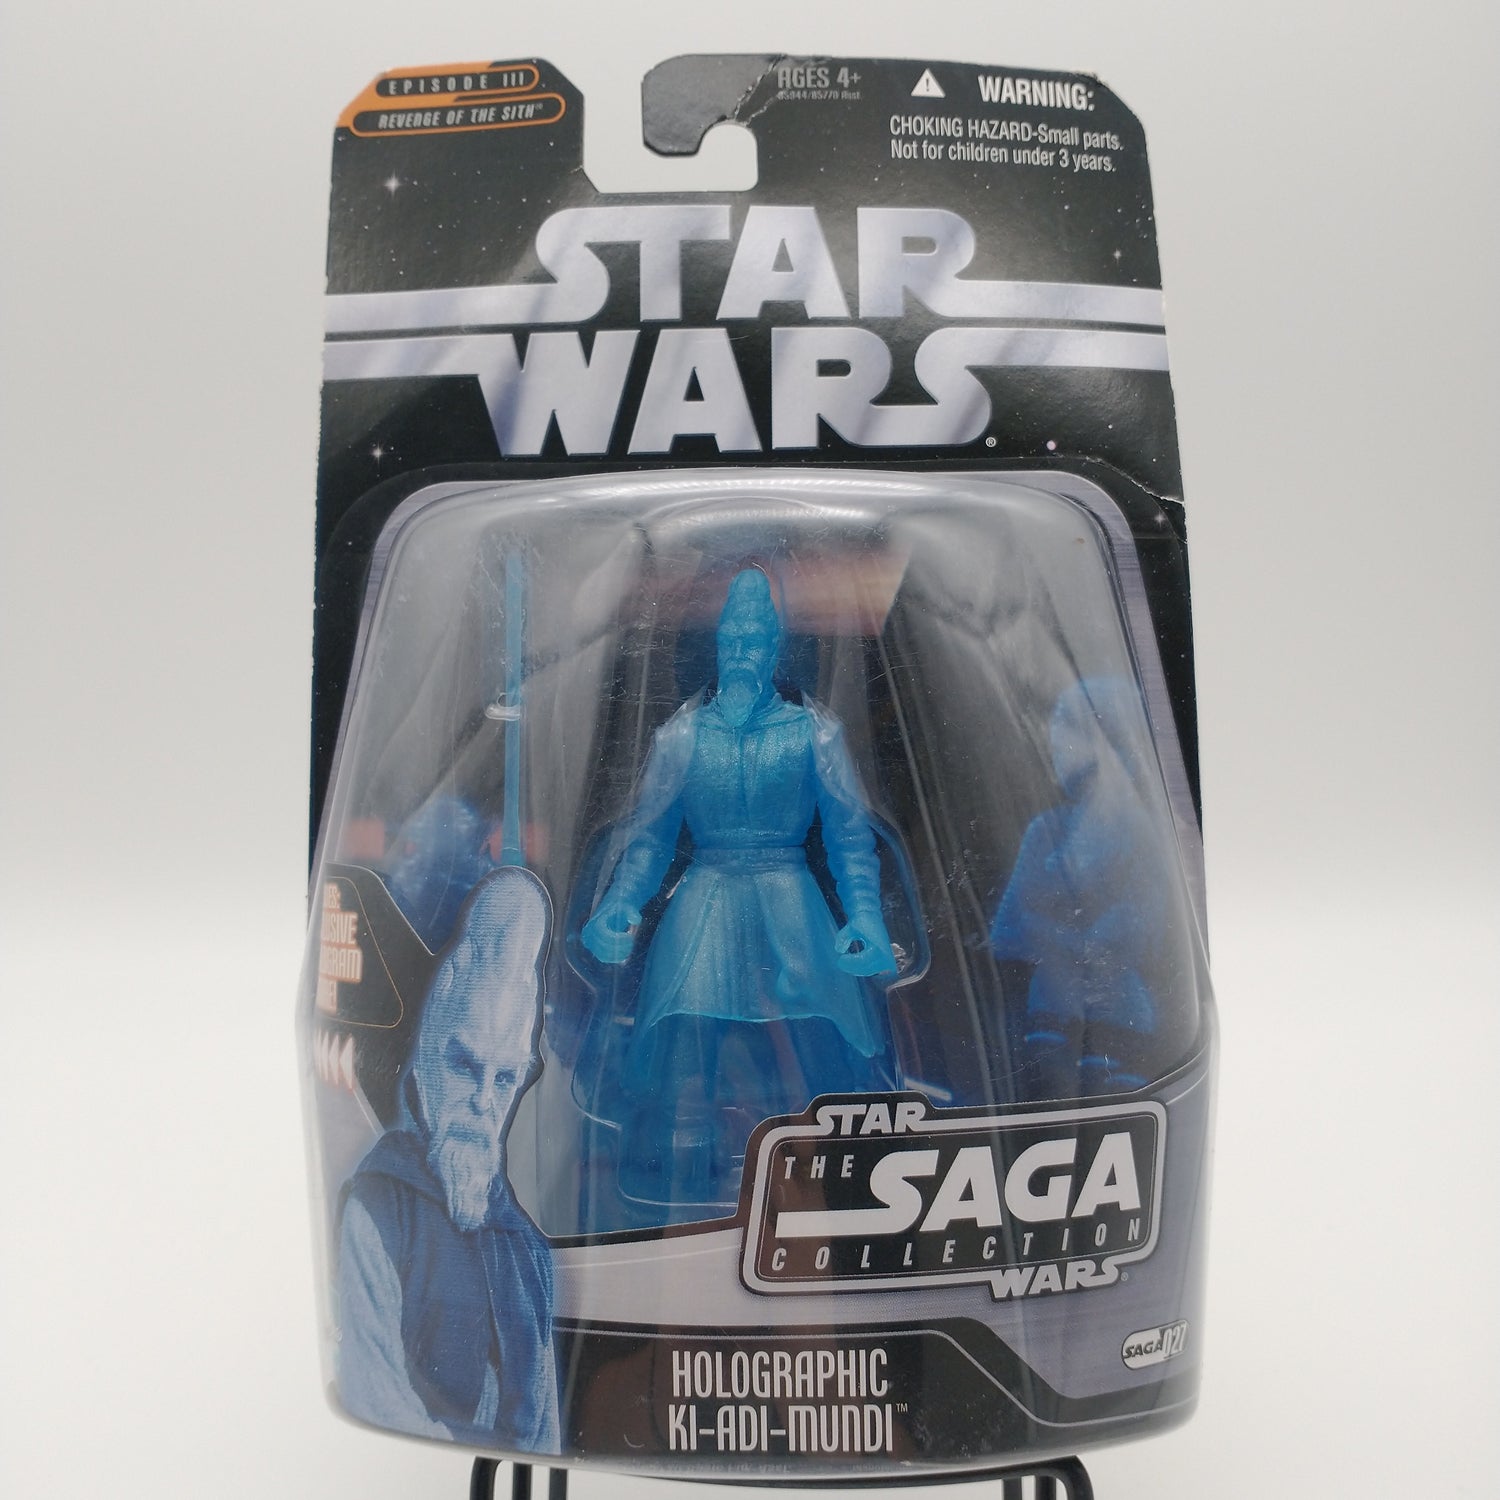 The front of the card and bubble are intact. The action figure inside is translucent and blue.